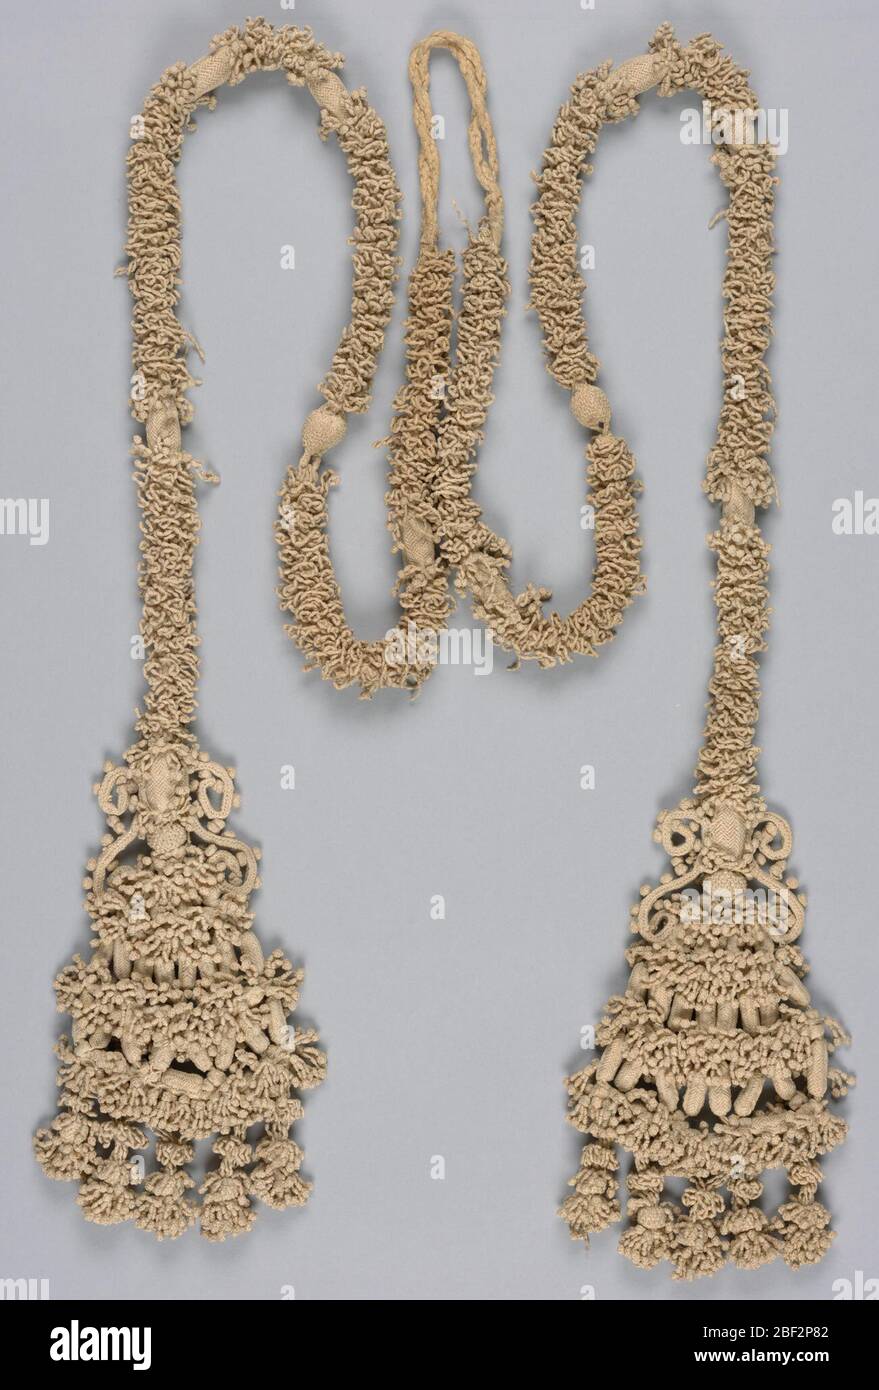 Cord with tassels. A long cord completely covered with knotting and braiding, to which are attached two equally large tassels arranged in tiers of elaborate knotting and braiding. Stock Photo